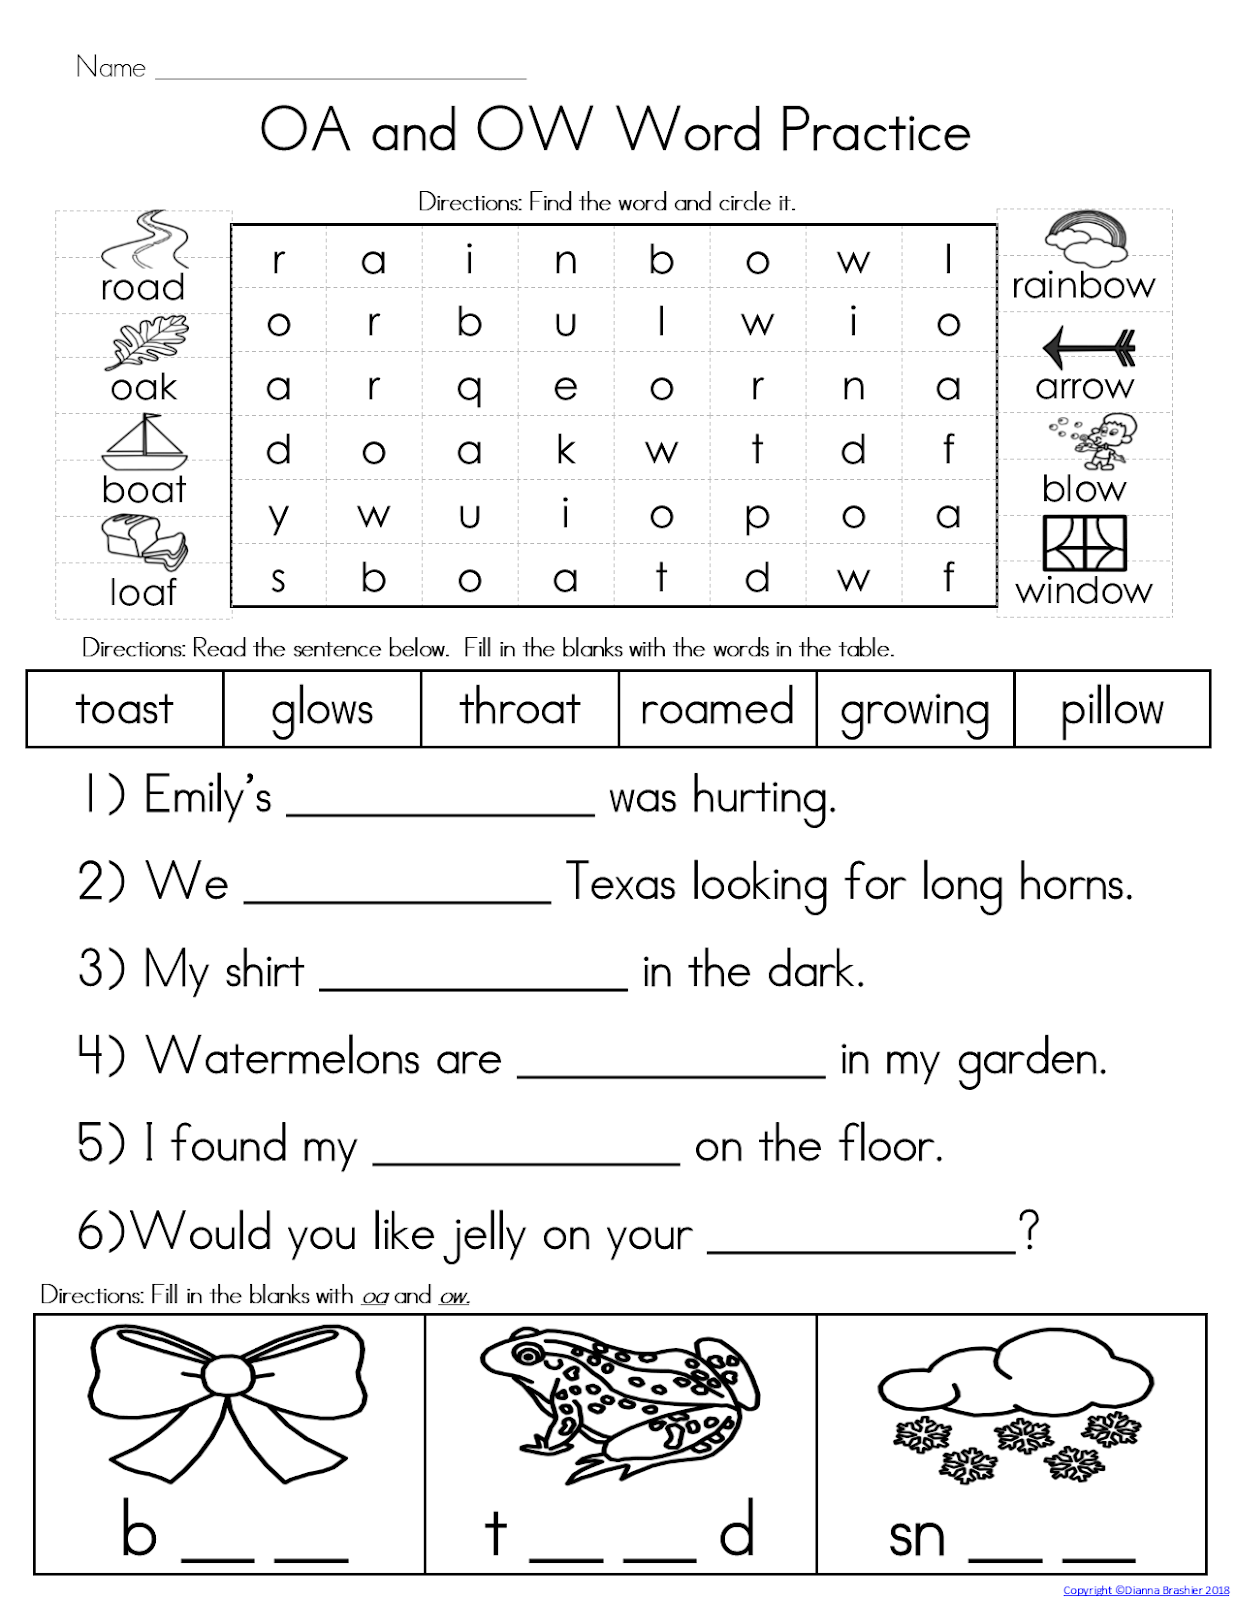 Teachers R US: oa, ow Literacy Activities Bundle with Assessment